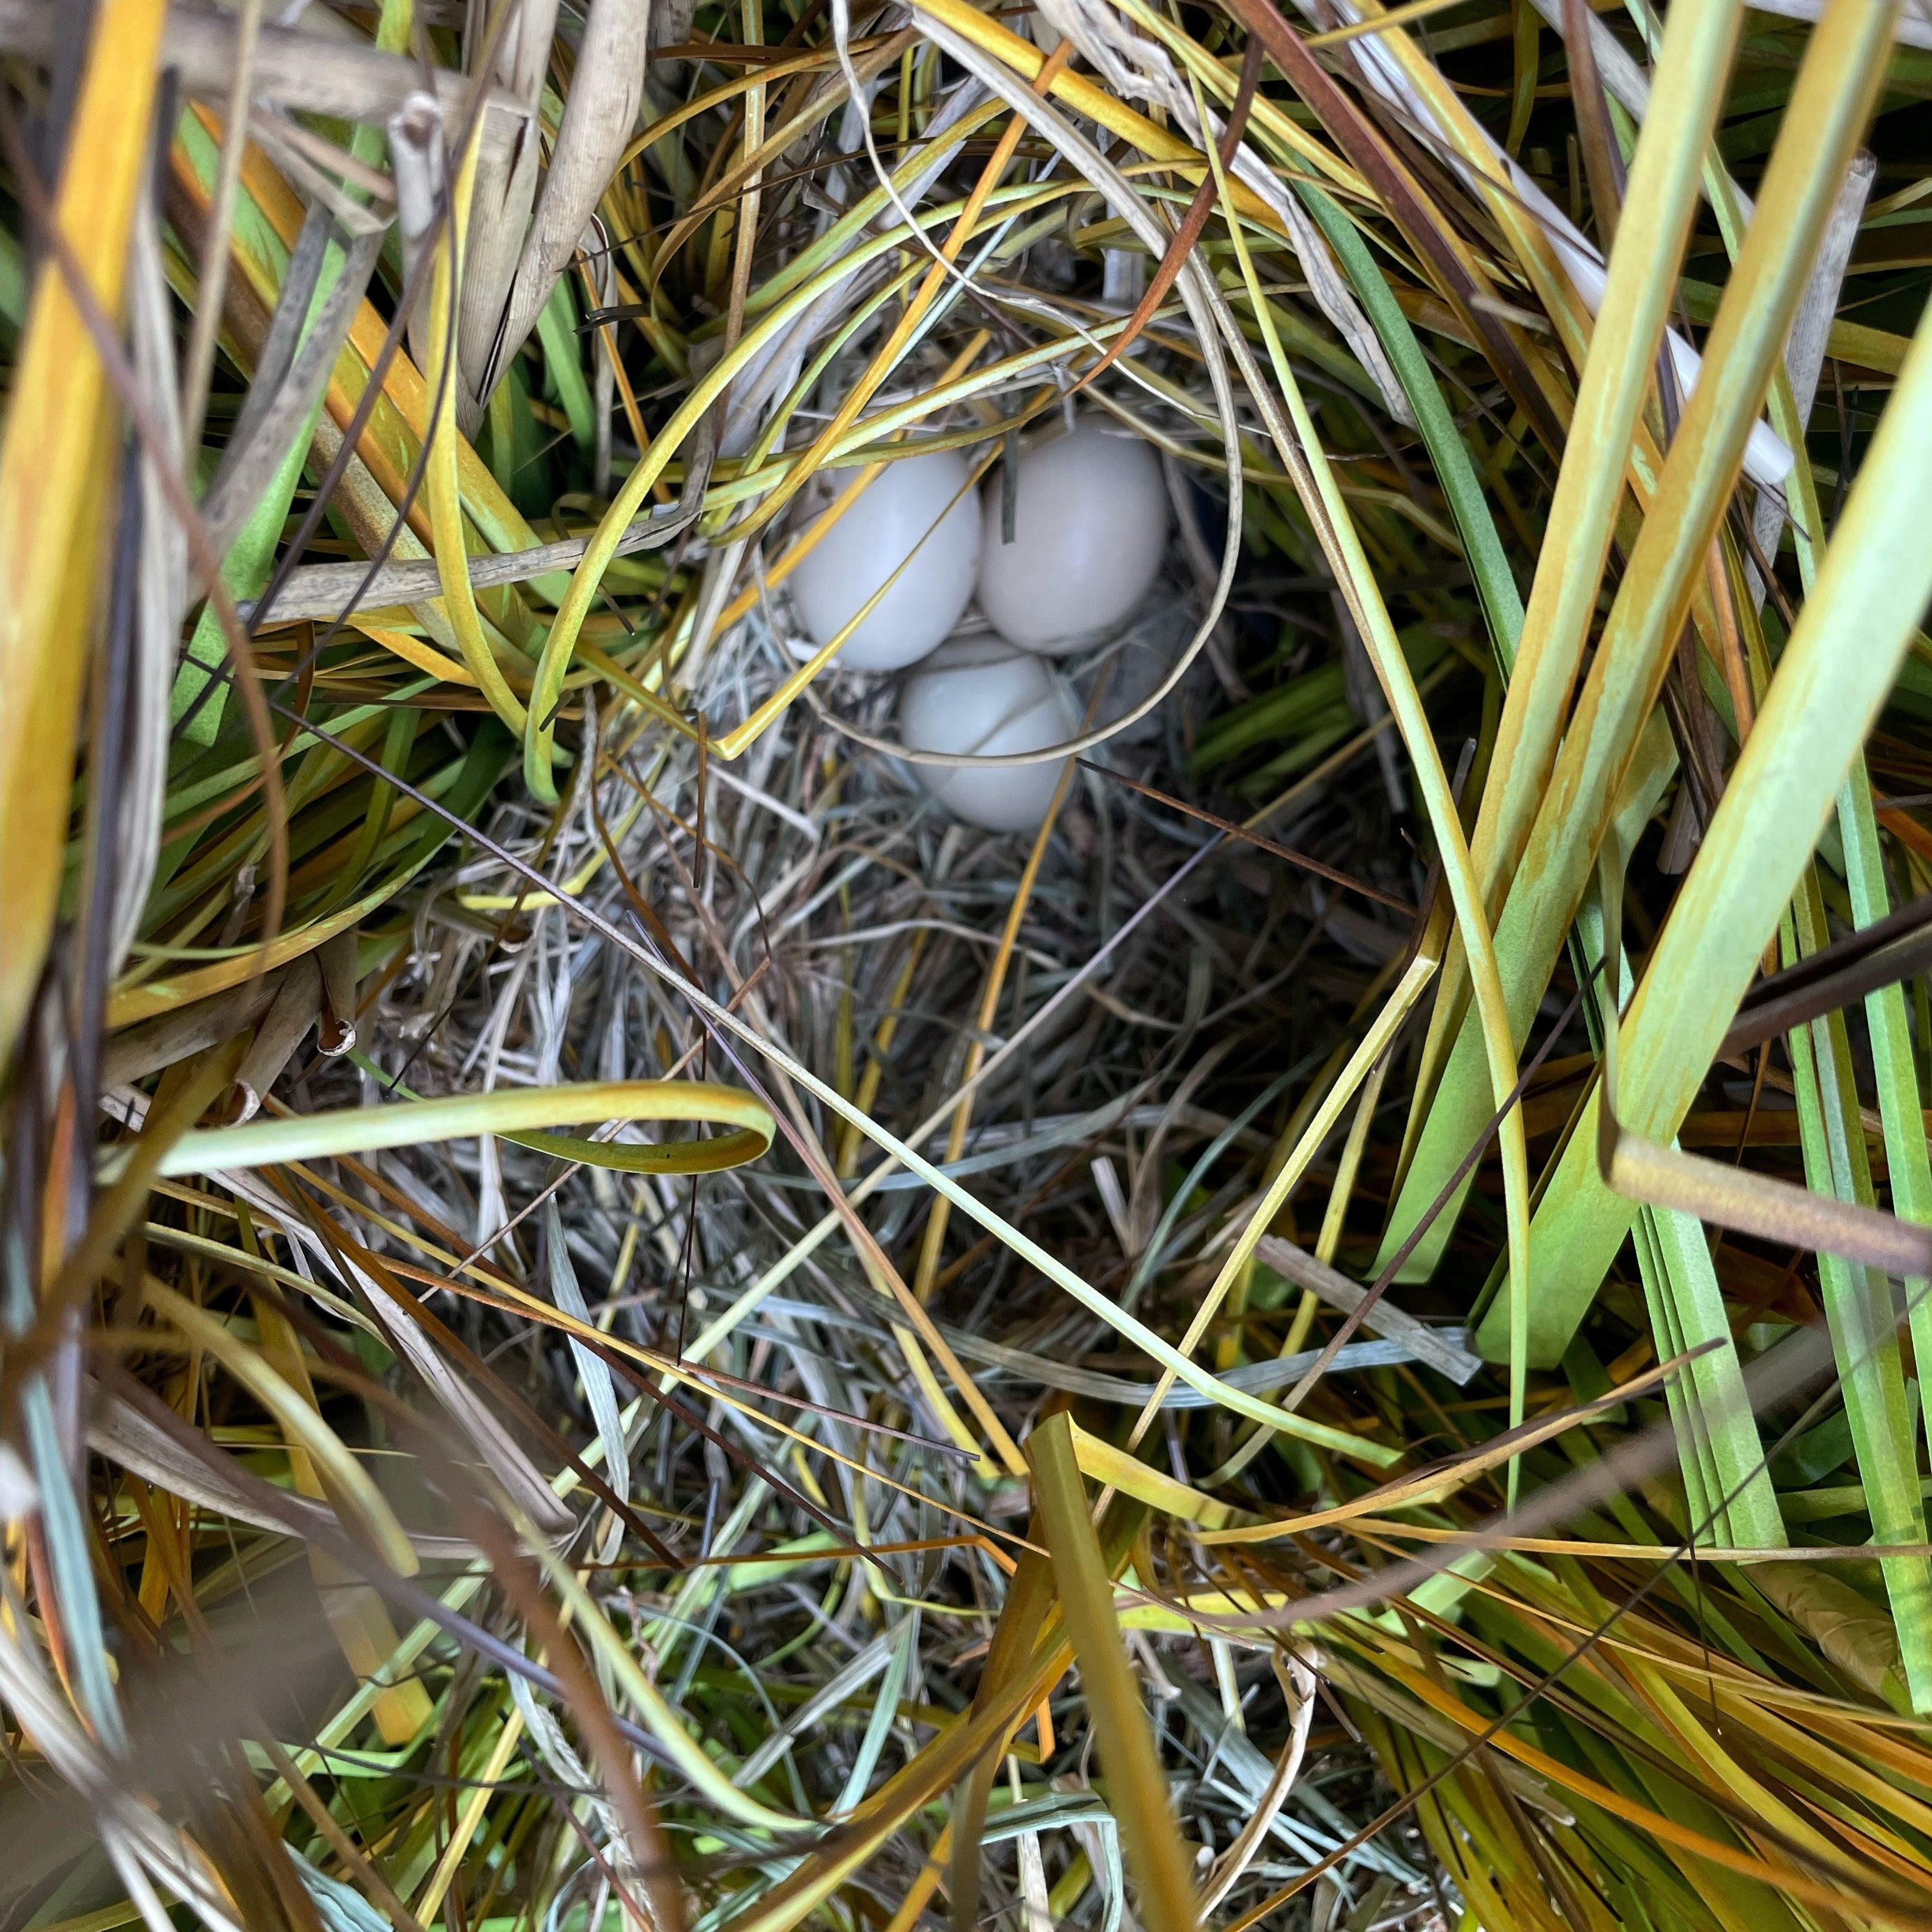 Top view image of a large grass nest with three small white eggs in the middle.